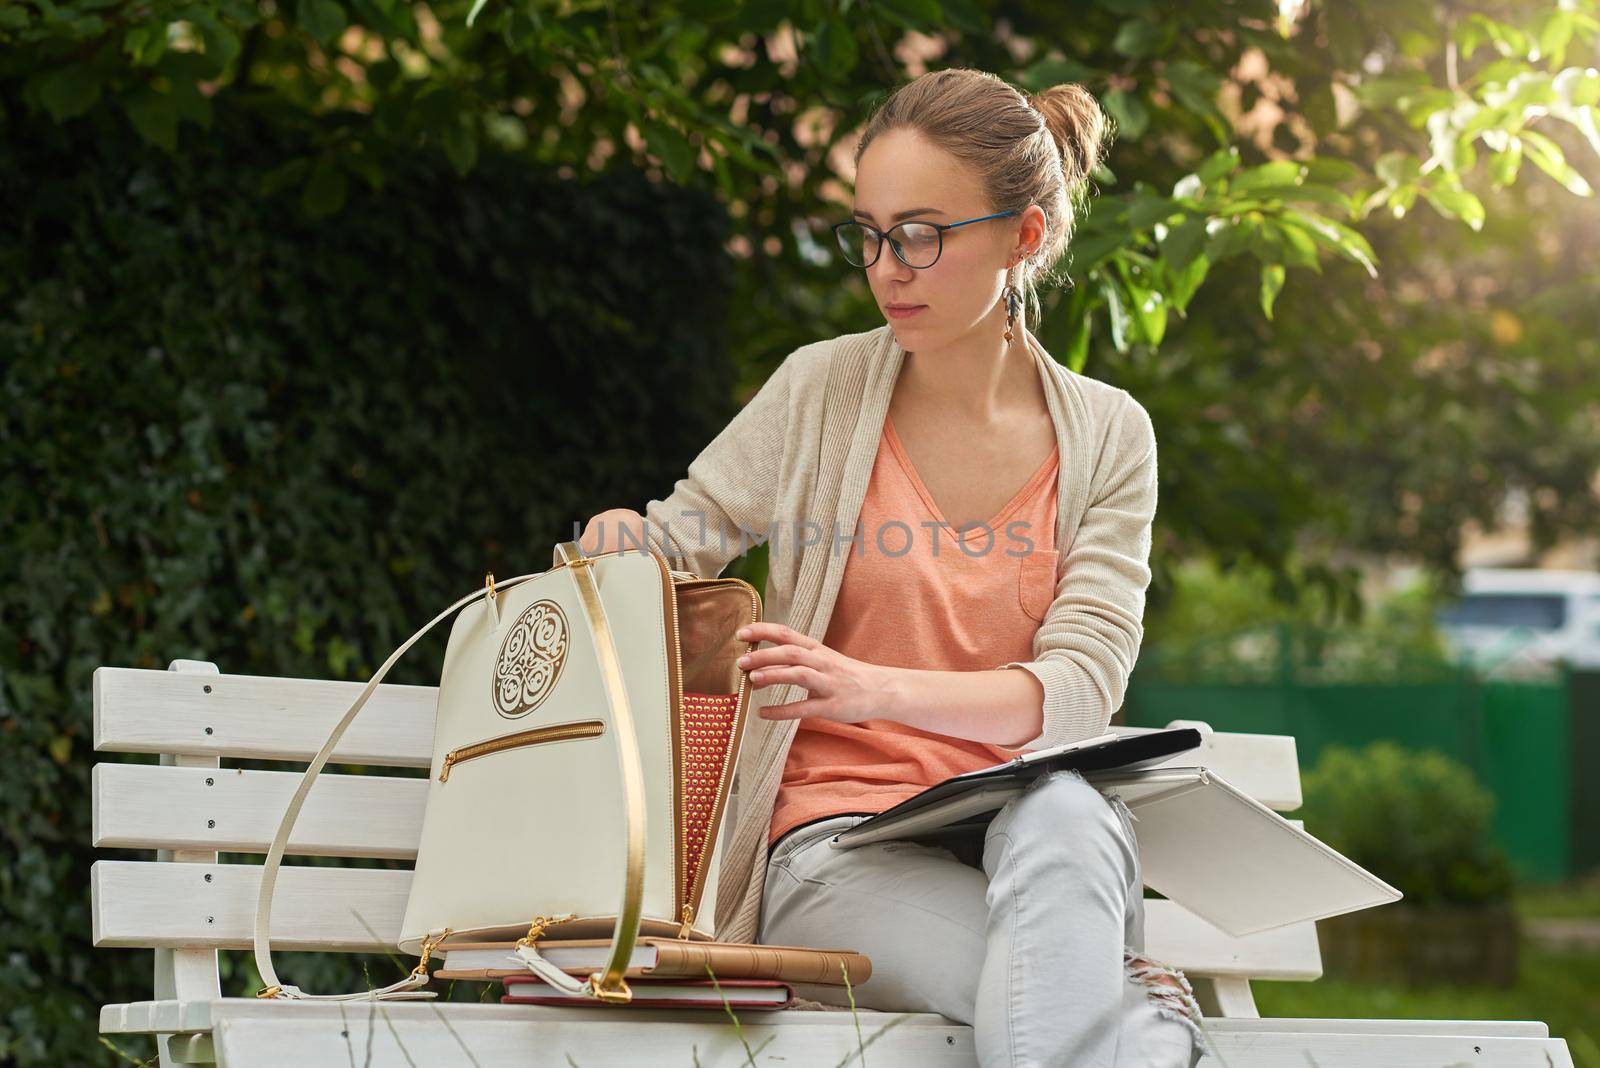 Young girl take something out of her white bag with a golden pattern and a zipper on white wooden bench park in the green city park. She wears blue jeans, cardigan, eyeglasses.